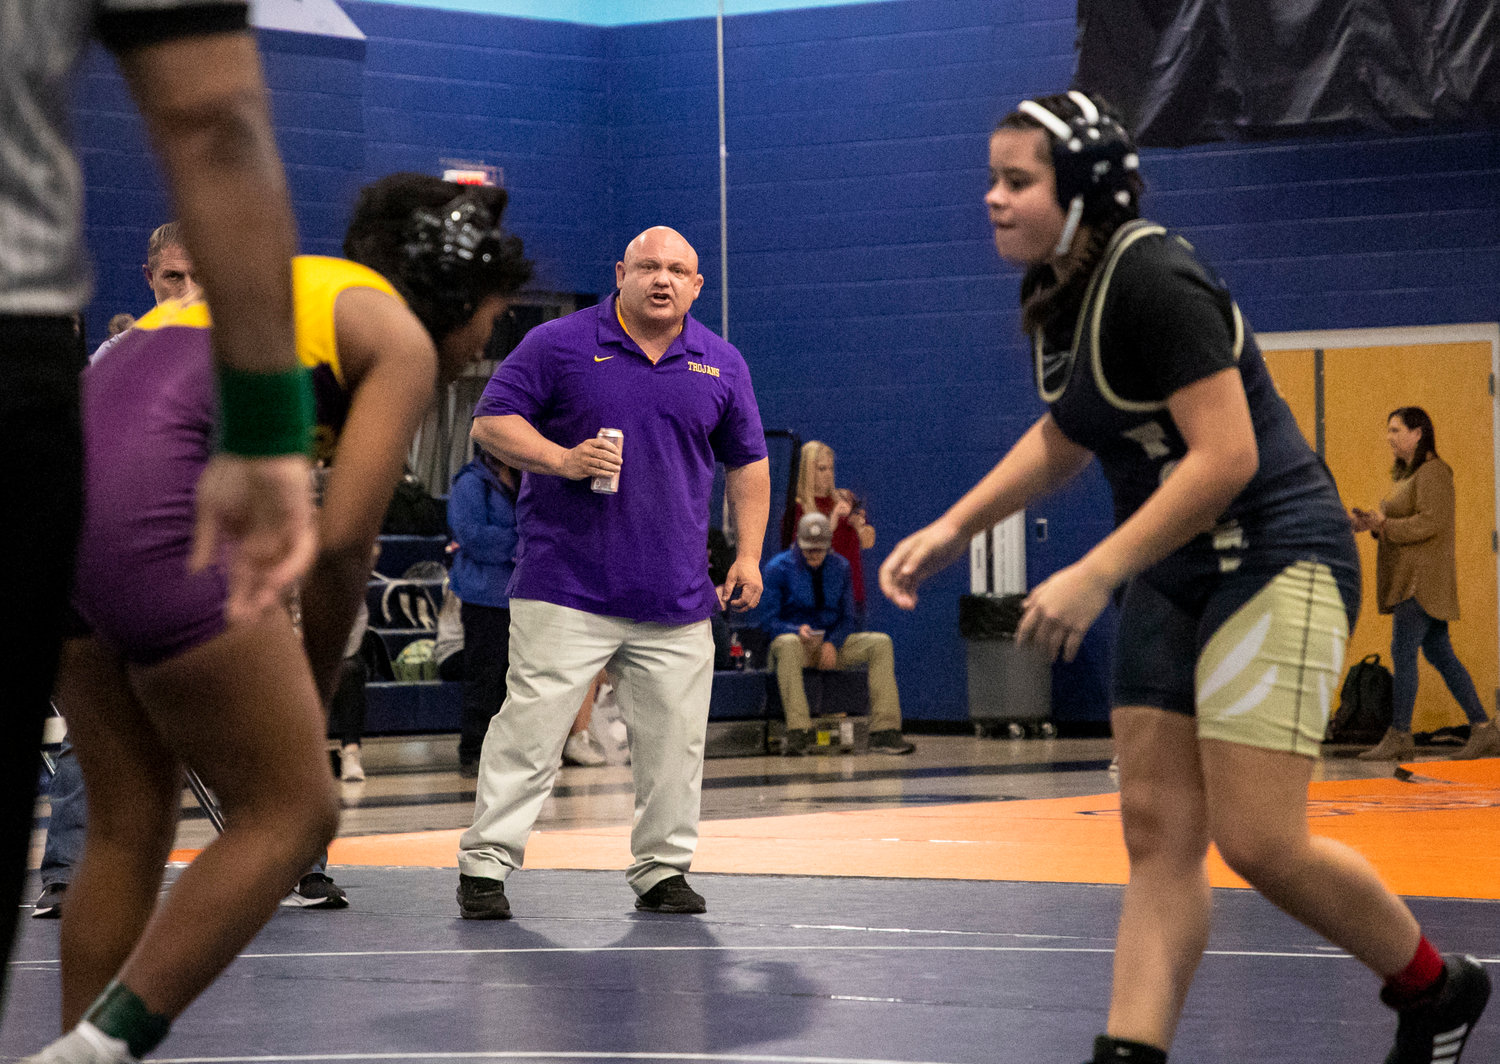 Daphne head wrestling coach Greg Jefcoat guides Taliah Wade during her semifinal match in the 152-pound class at the Baldwin County Championships Friday night in Gulf Shores. The Lady Trojans went on to win the team title with seven individual champions and eight more top-four finishers.